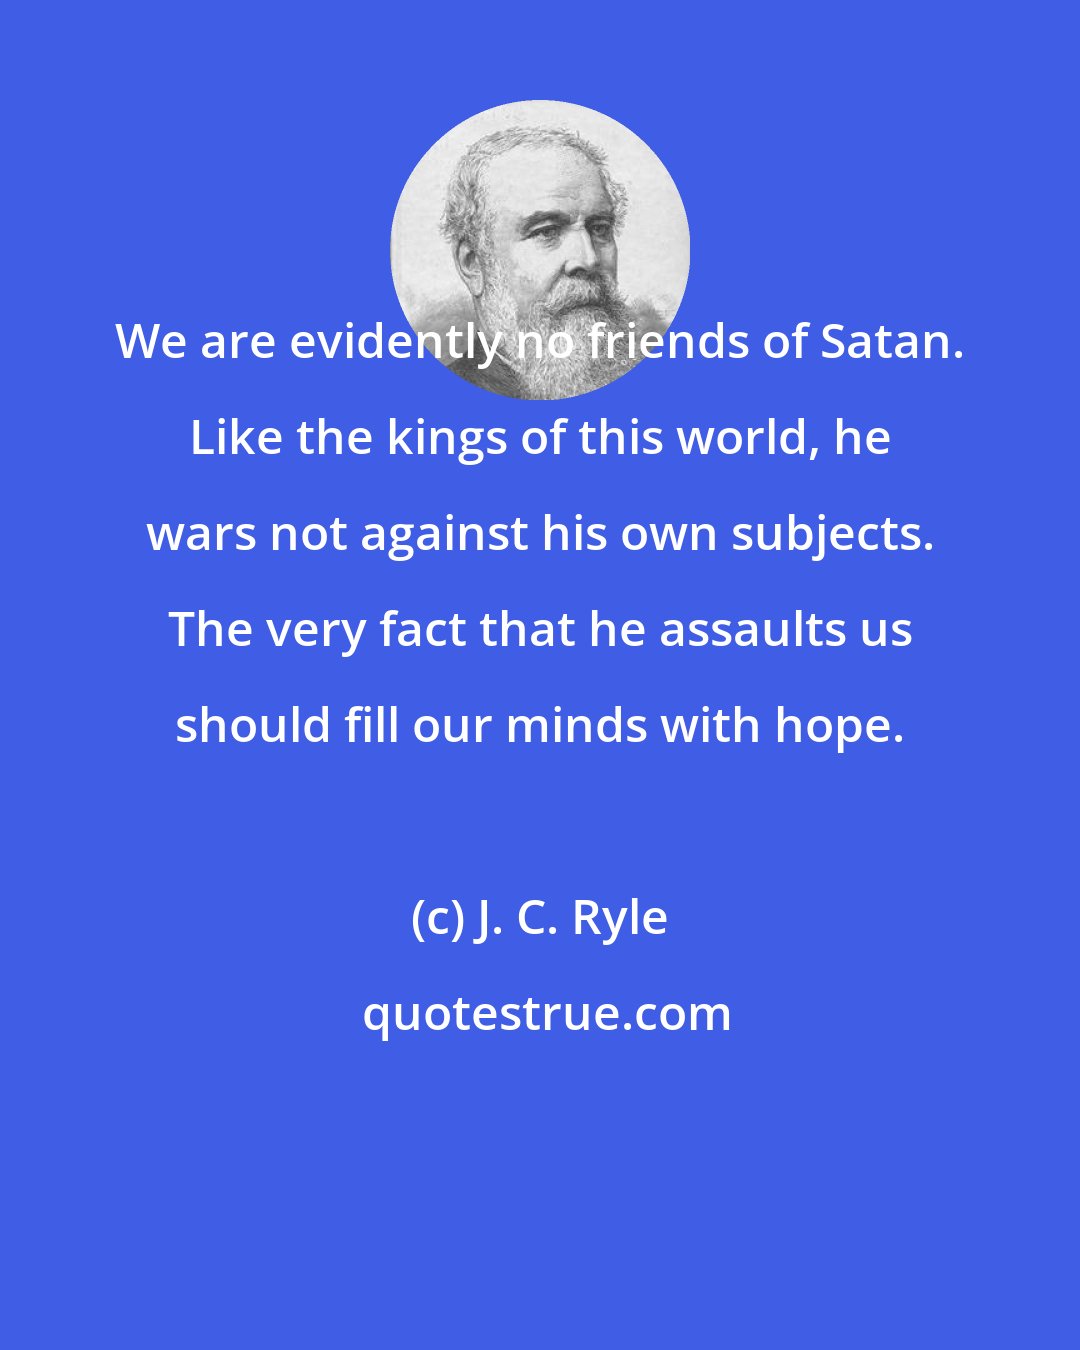 J. C. Ryle: We are evidently no friends of Satan. Like the kings of this world, he wars not against his own subjects. The very fact that he assaults us should fill our minds with hope.